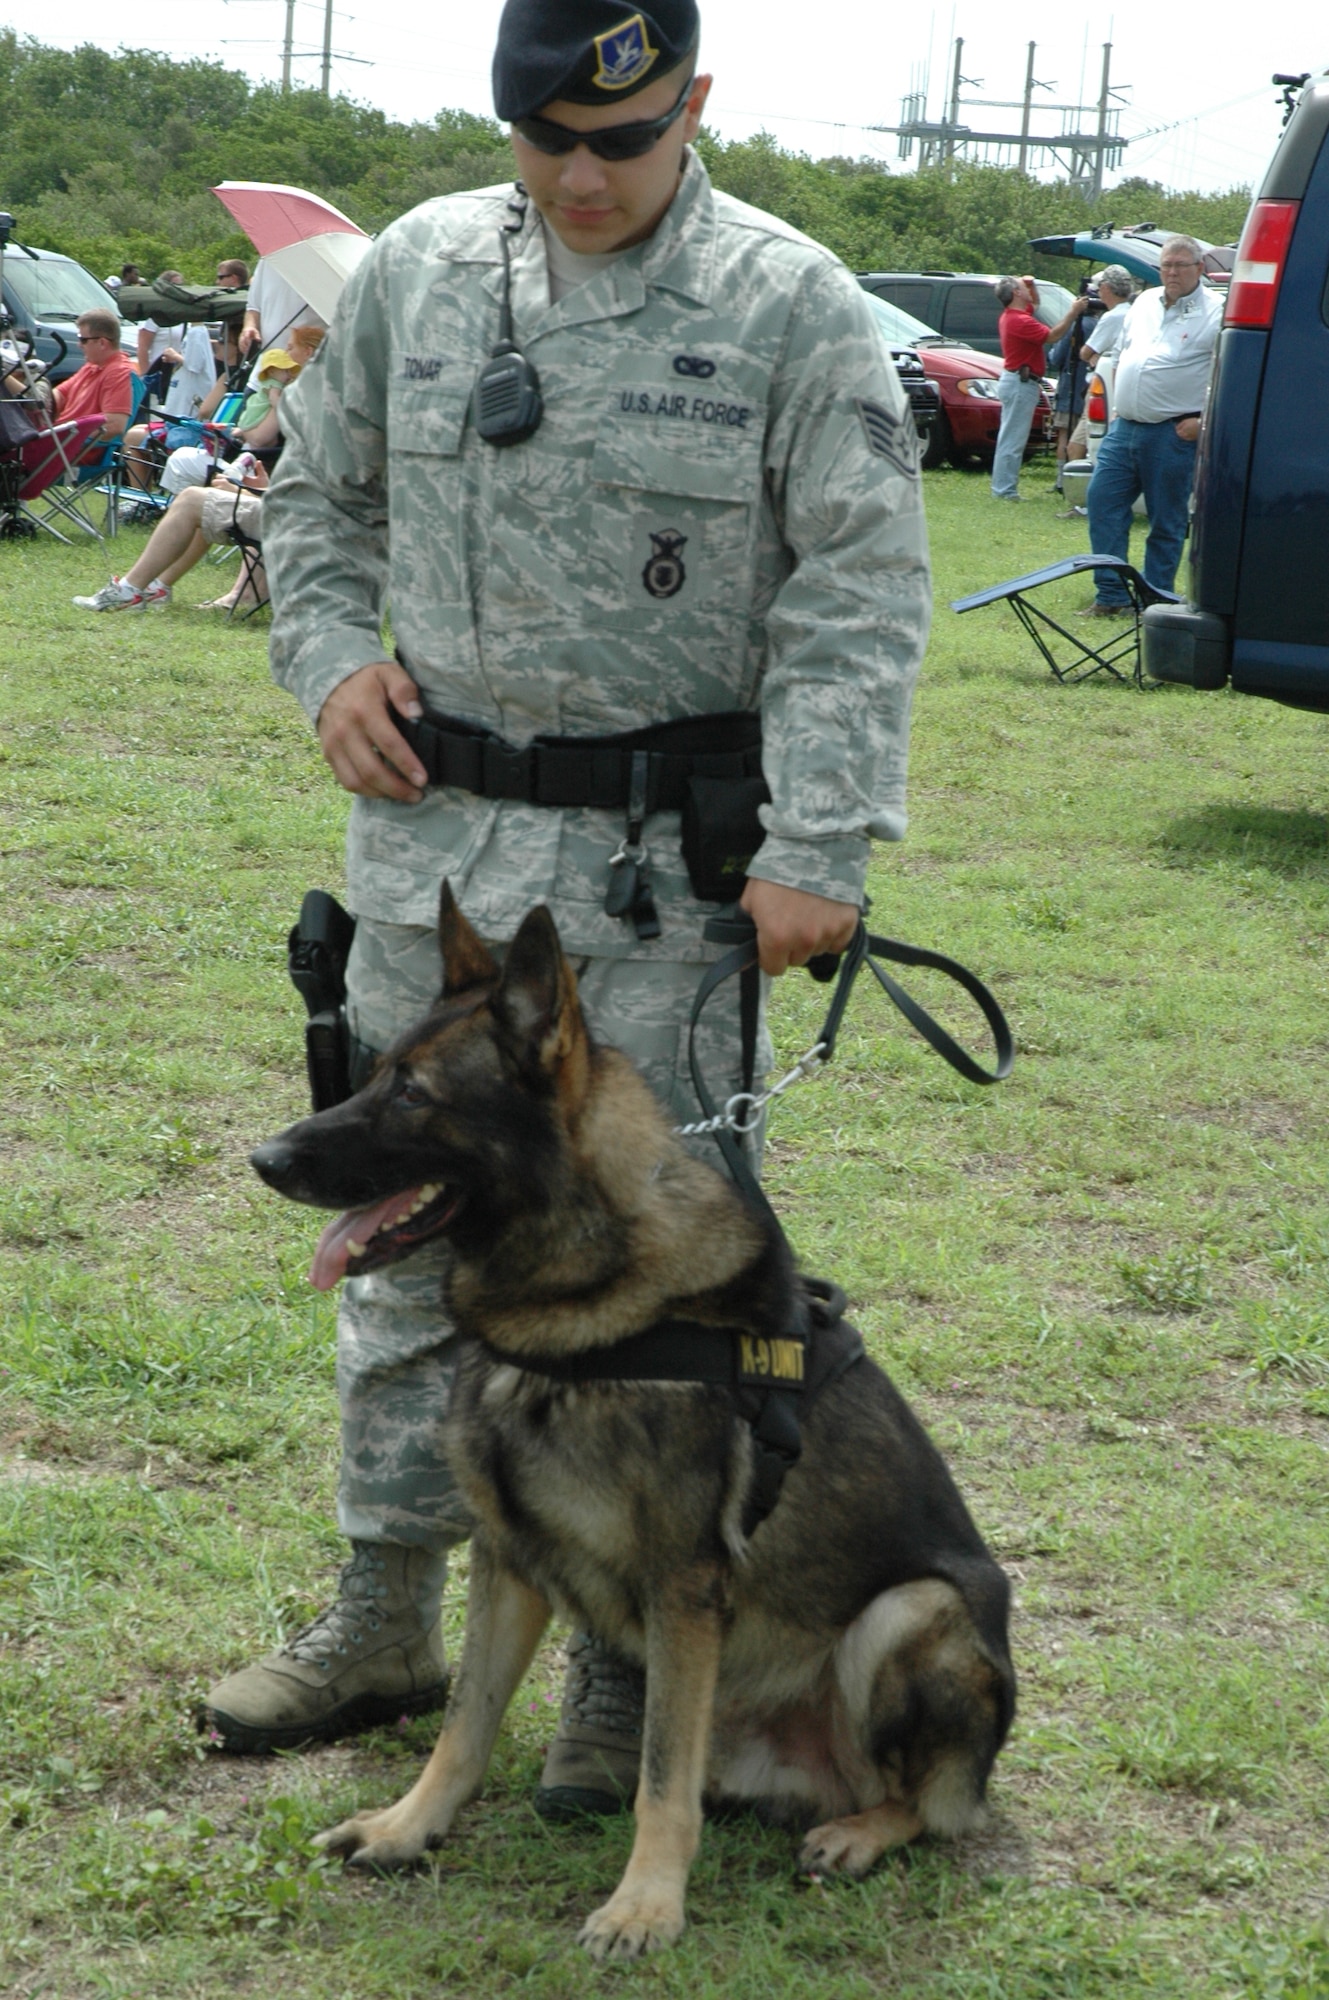 Staff Sgt. Andres Tovar and K-9 Ciro, 45th Security Forces Squadron, provide crowd safety and security at Cape Canaveral Air Force Station, Fla., for the final launch of a NASA Space Shuttle July 8, 2011. The successful STS-135 mission marked the culmination of three decades of support of the shuttle program by the 45th Space Wing, other Air Force units and government agencies, and their mission partners on the Eastern Range. (U.S. Air Force photo/Eric Brian)